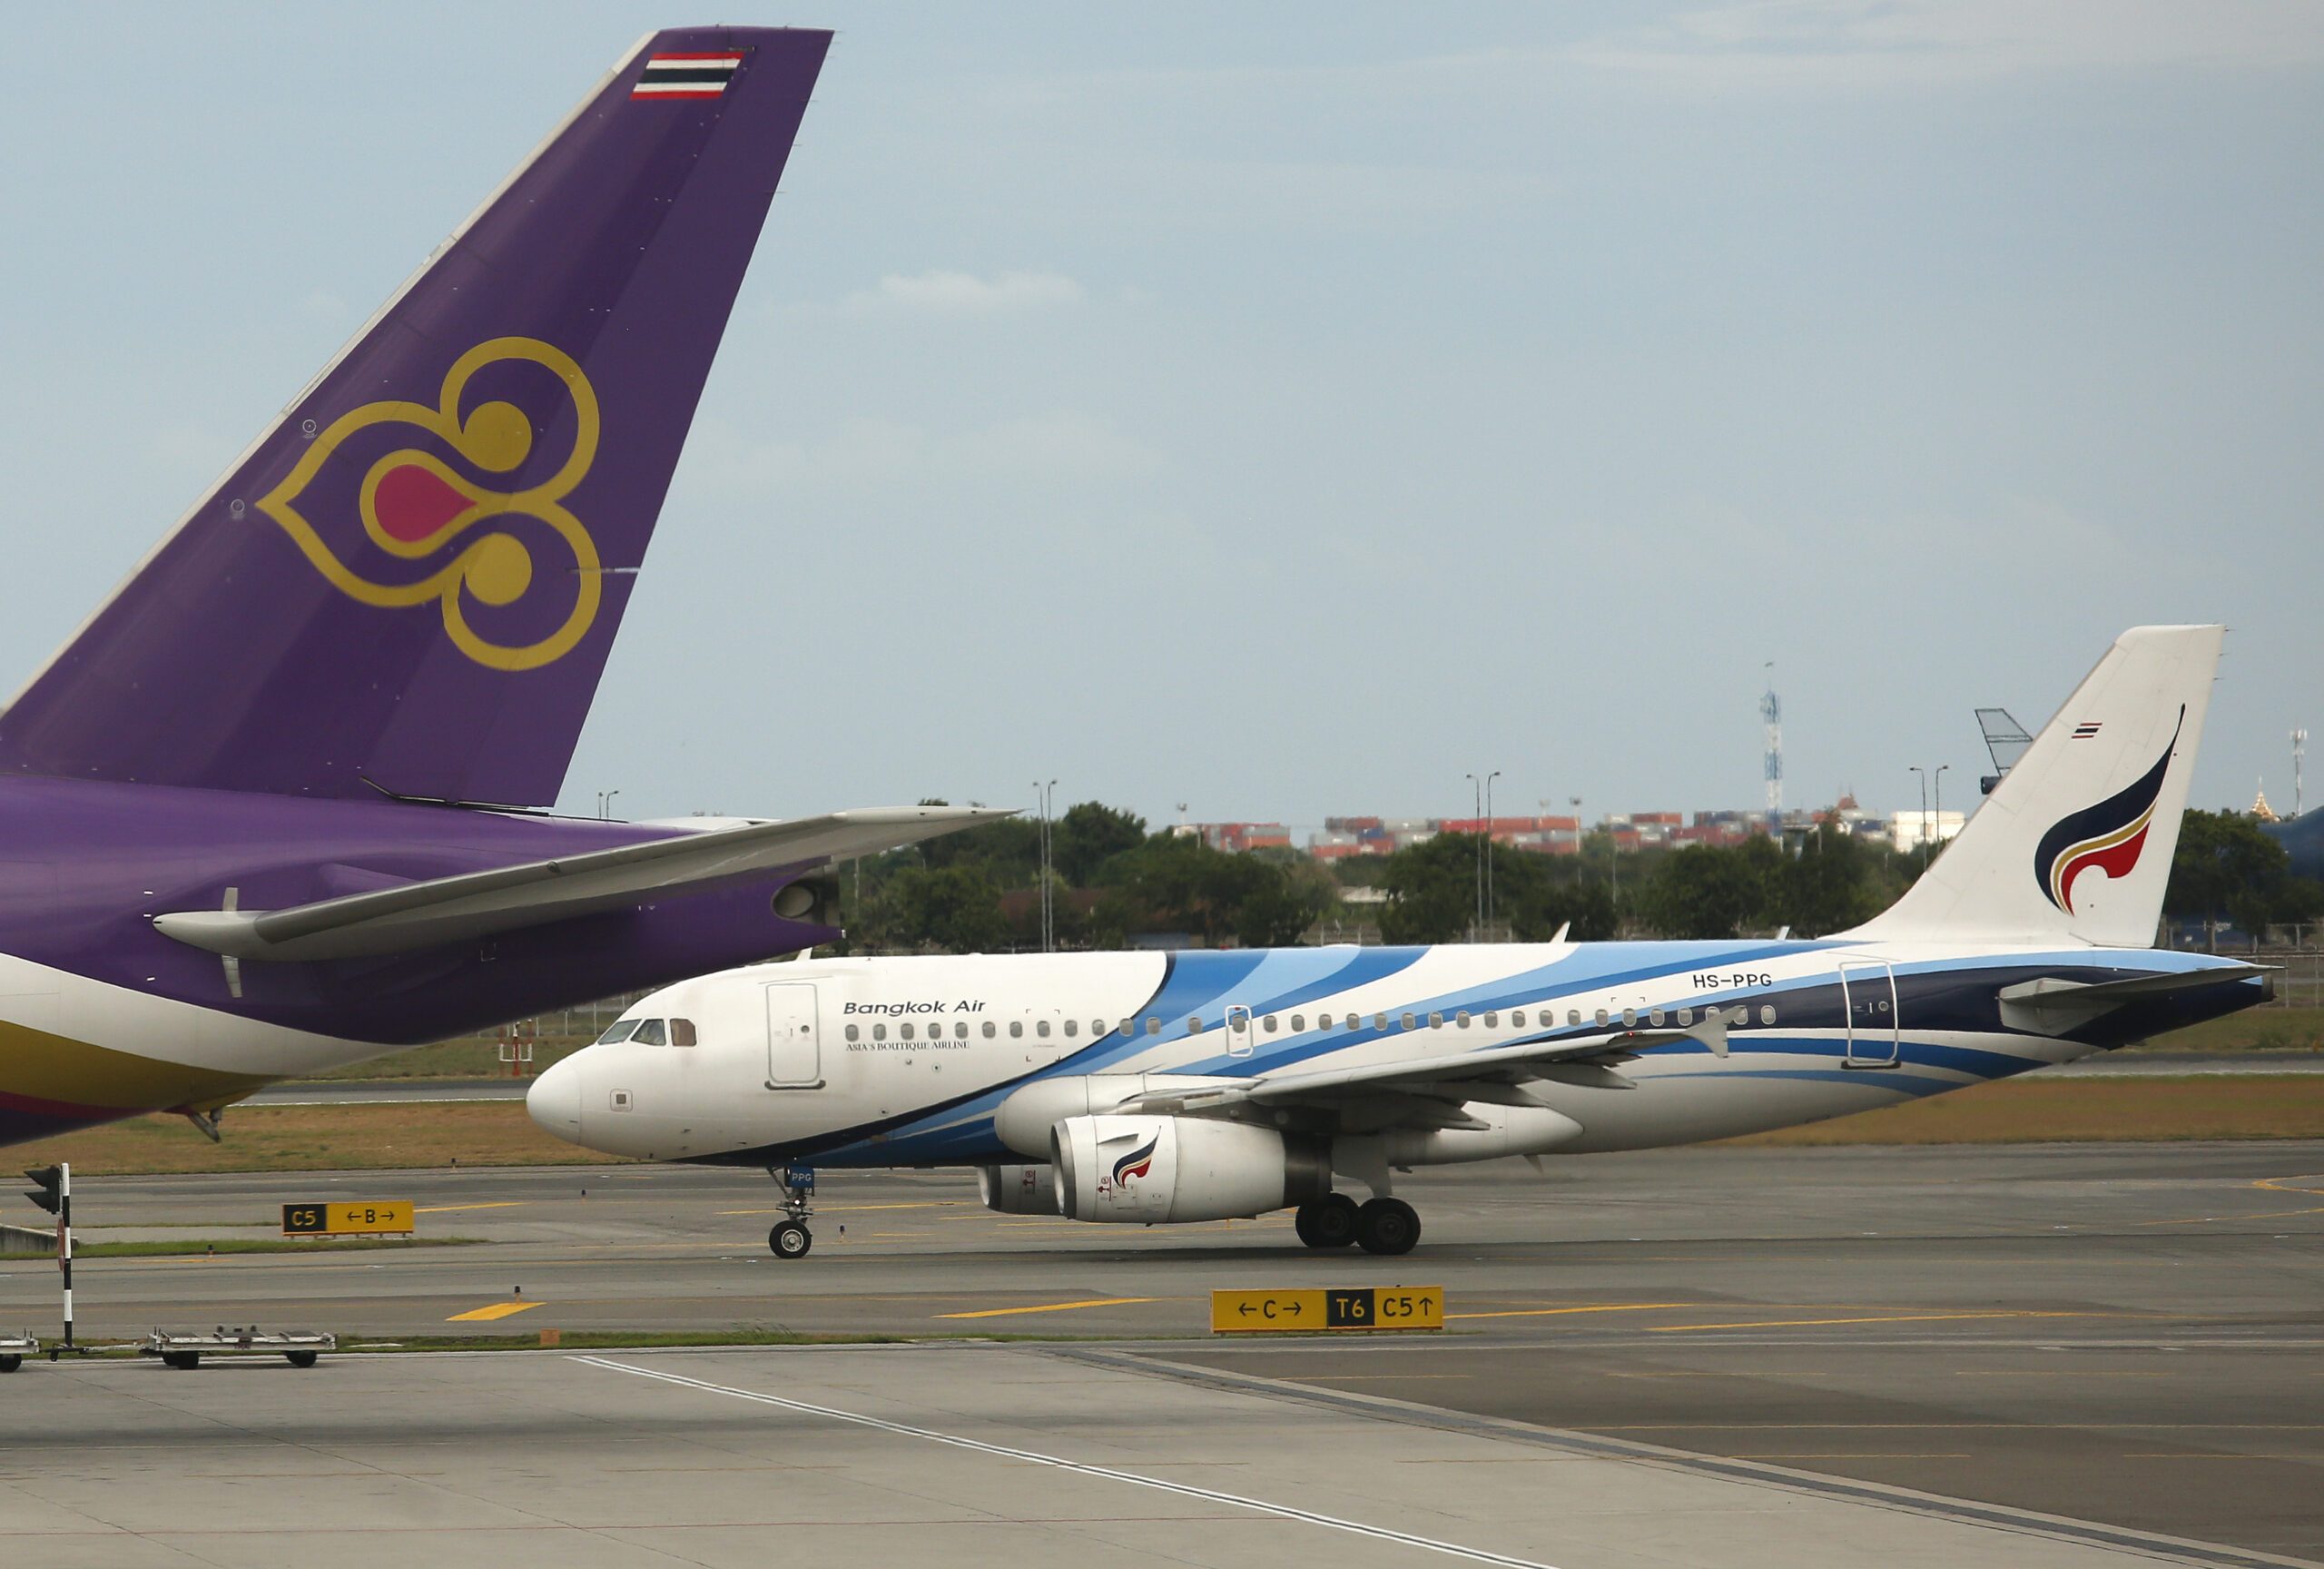 Thai airlines cramped by safety, capacity issues – IATA